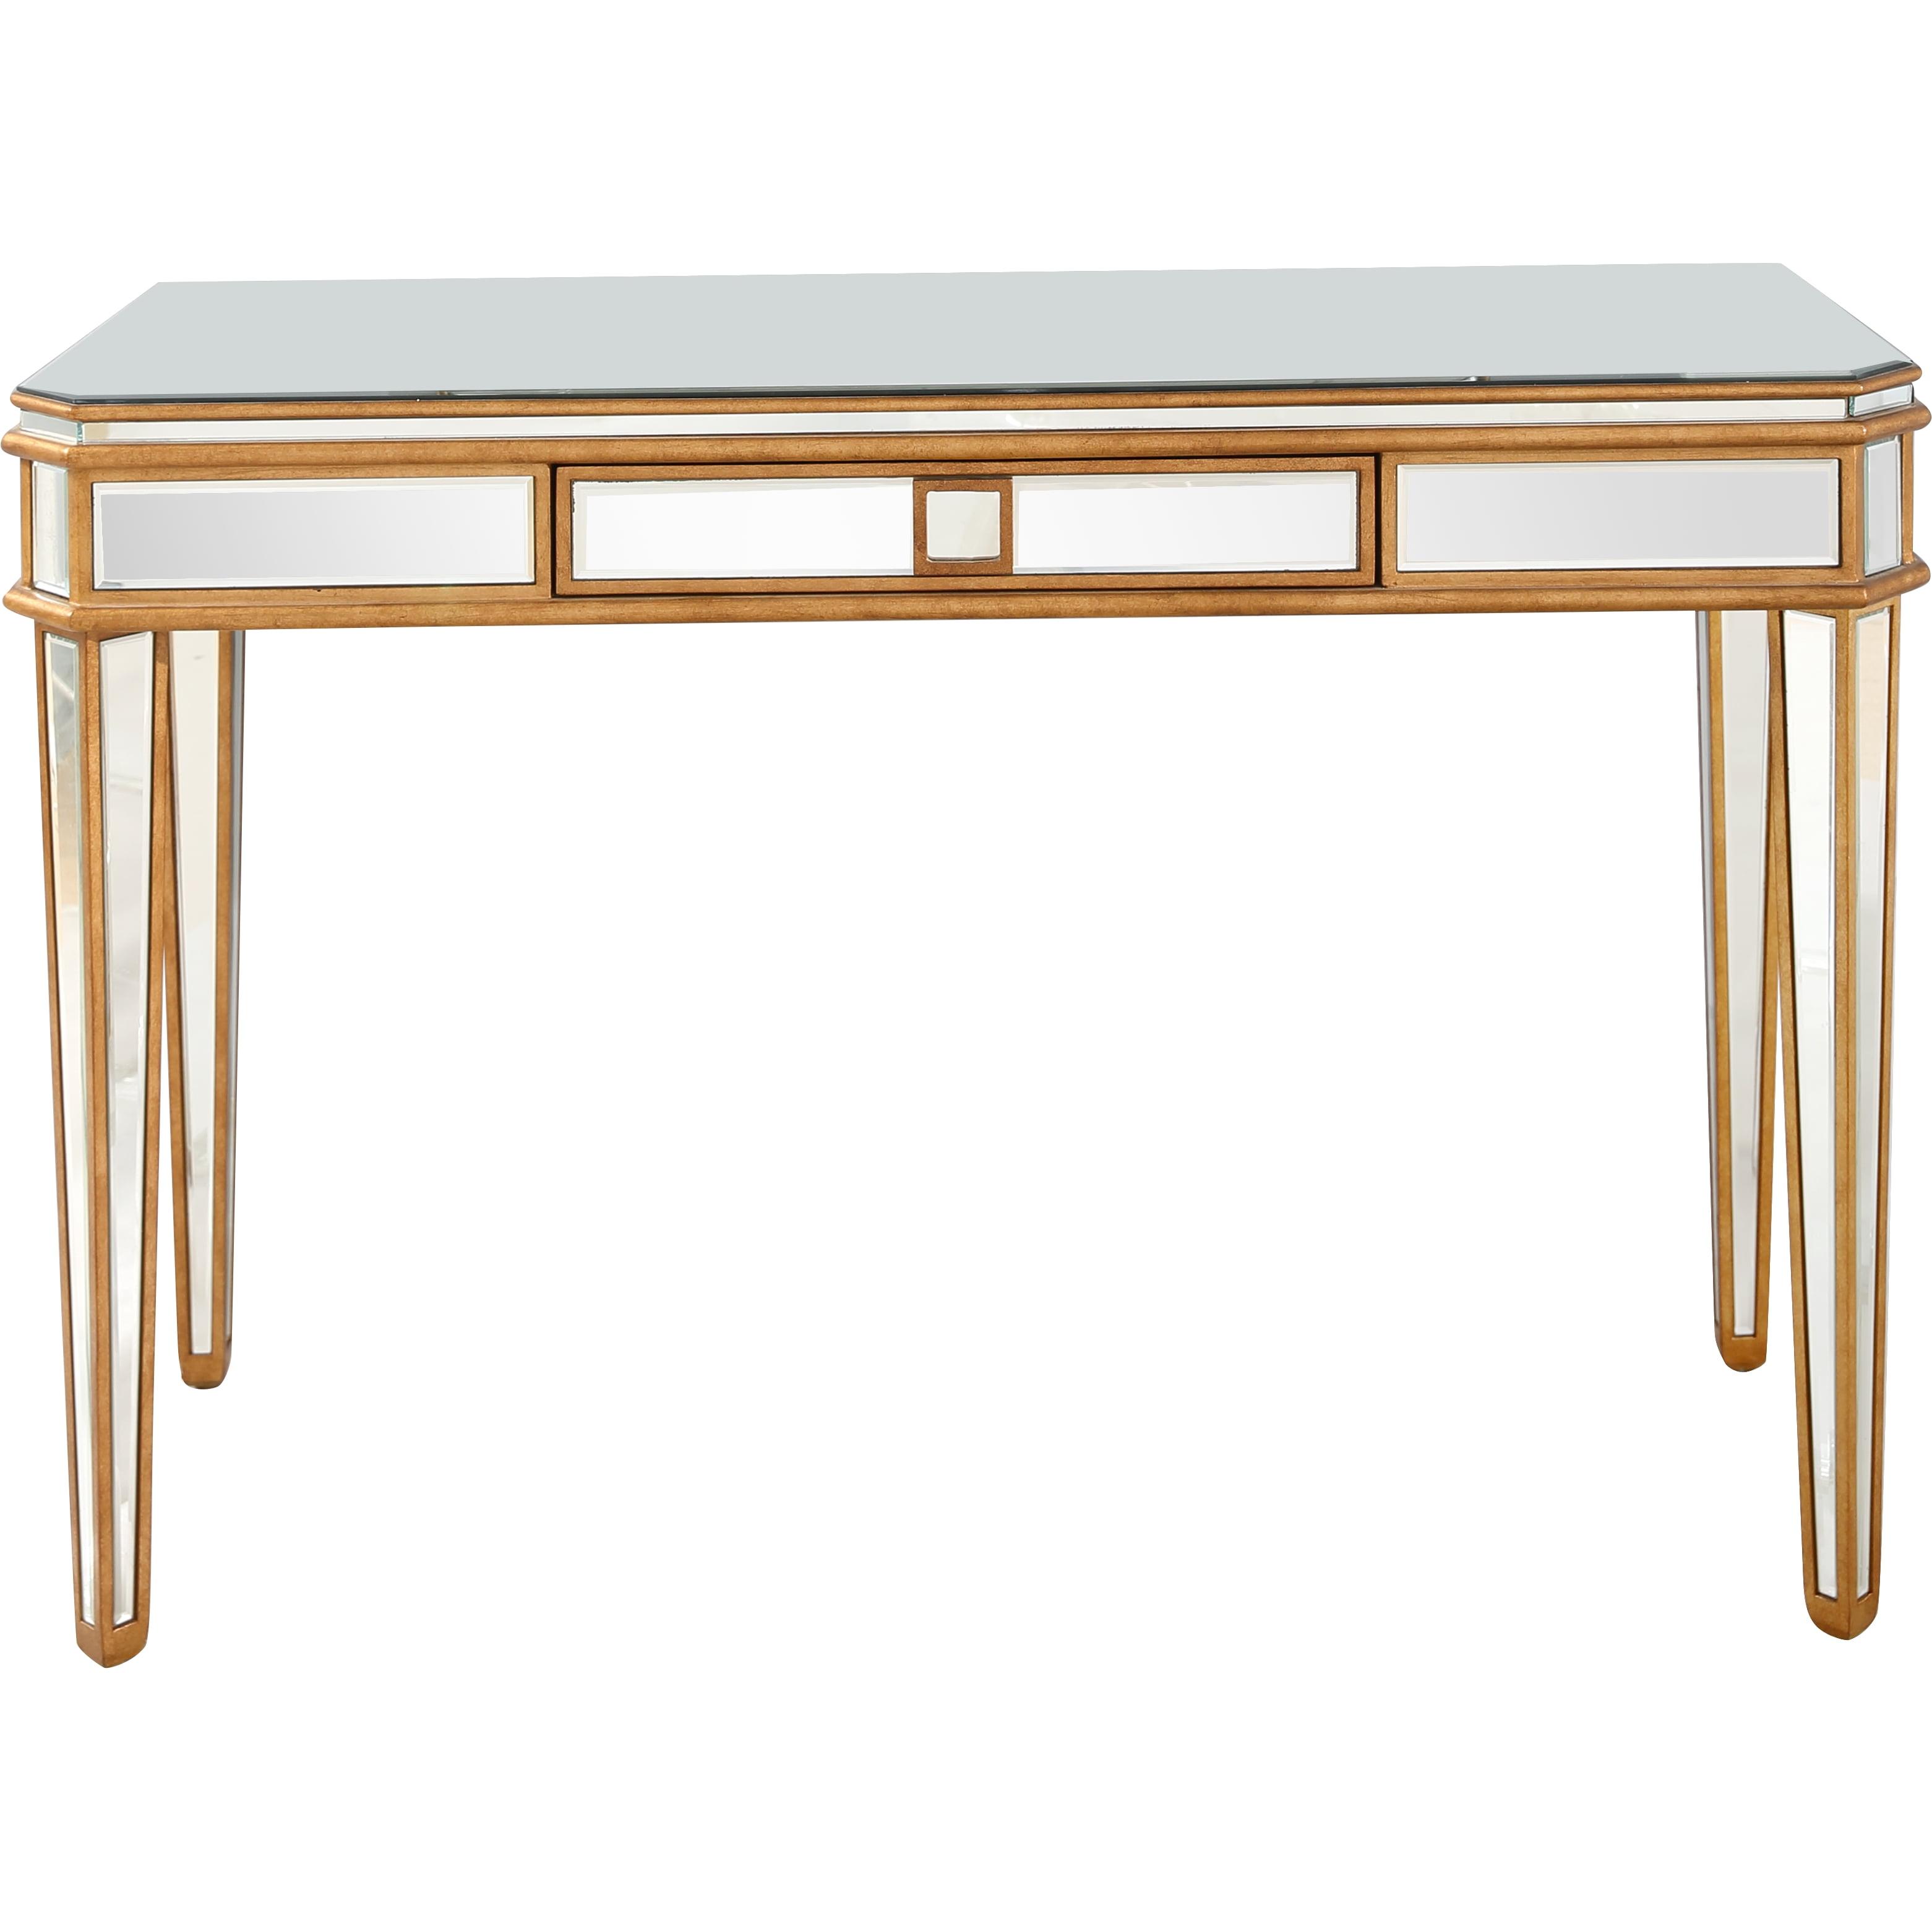 Elegant Finley Mirrored Console with Antique Gold Finish